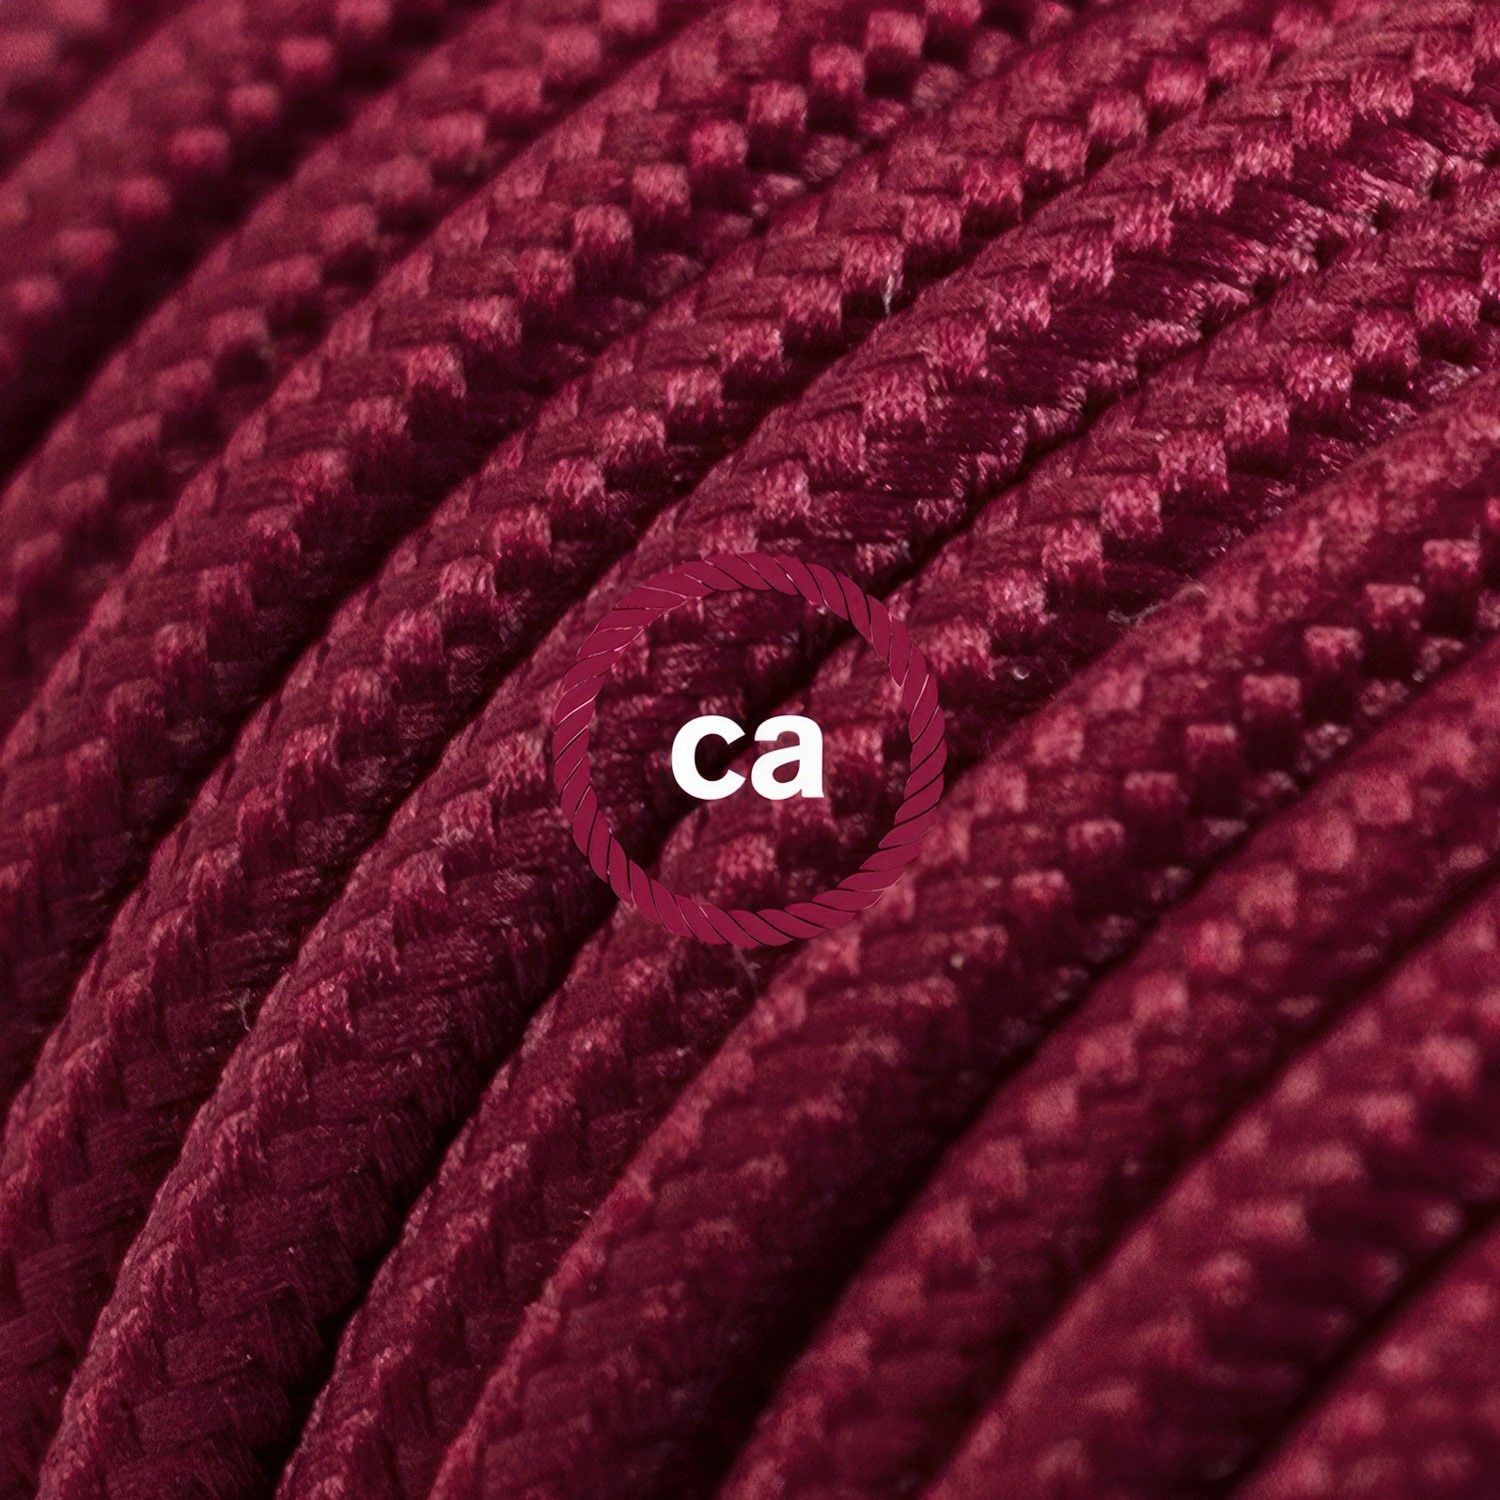 Burgundy Rayon fabric RM19 2P 10A Extension cable Made in Italy